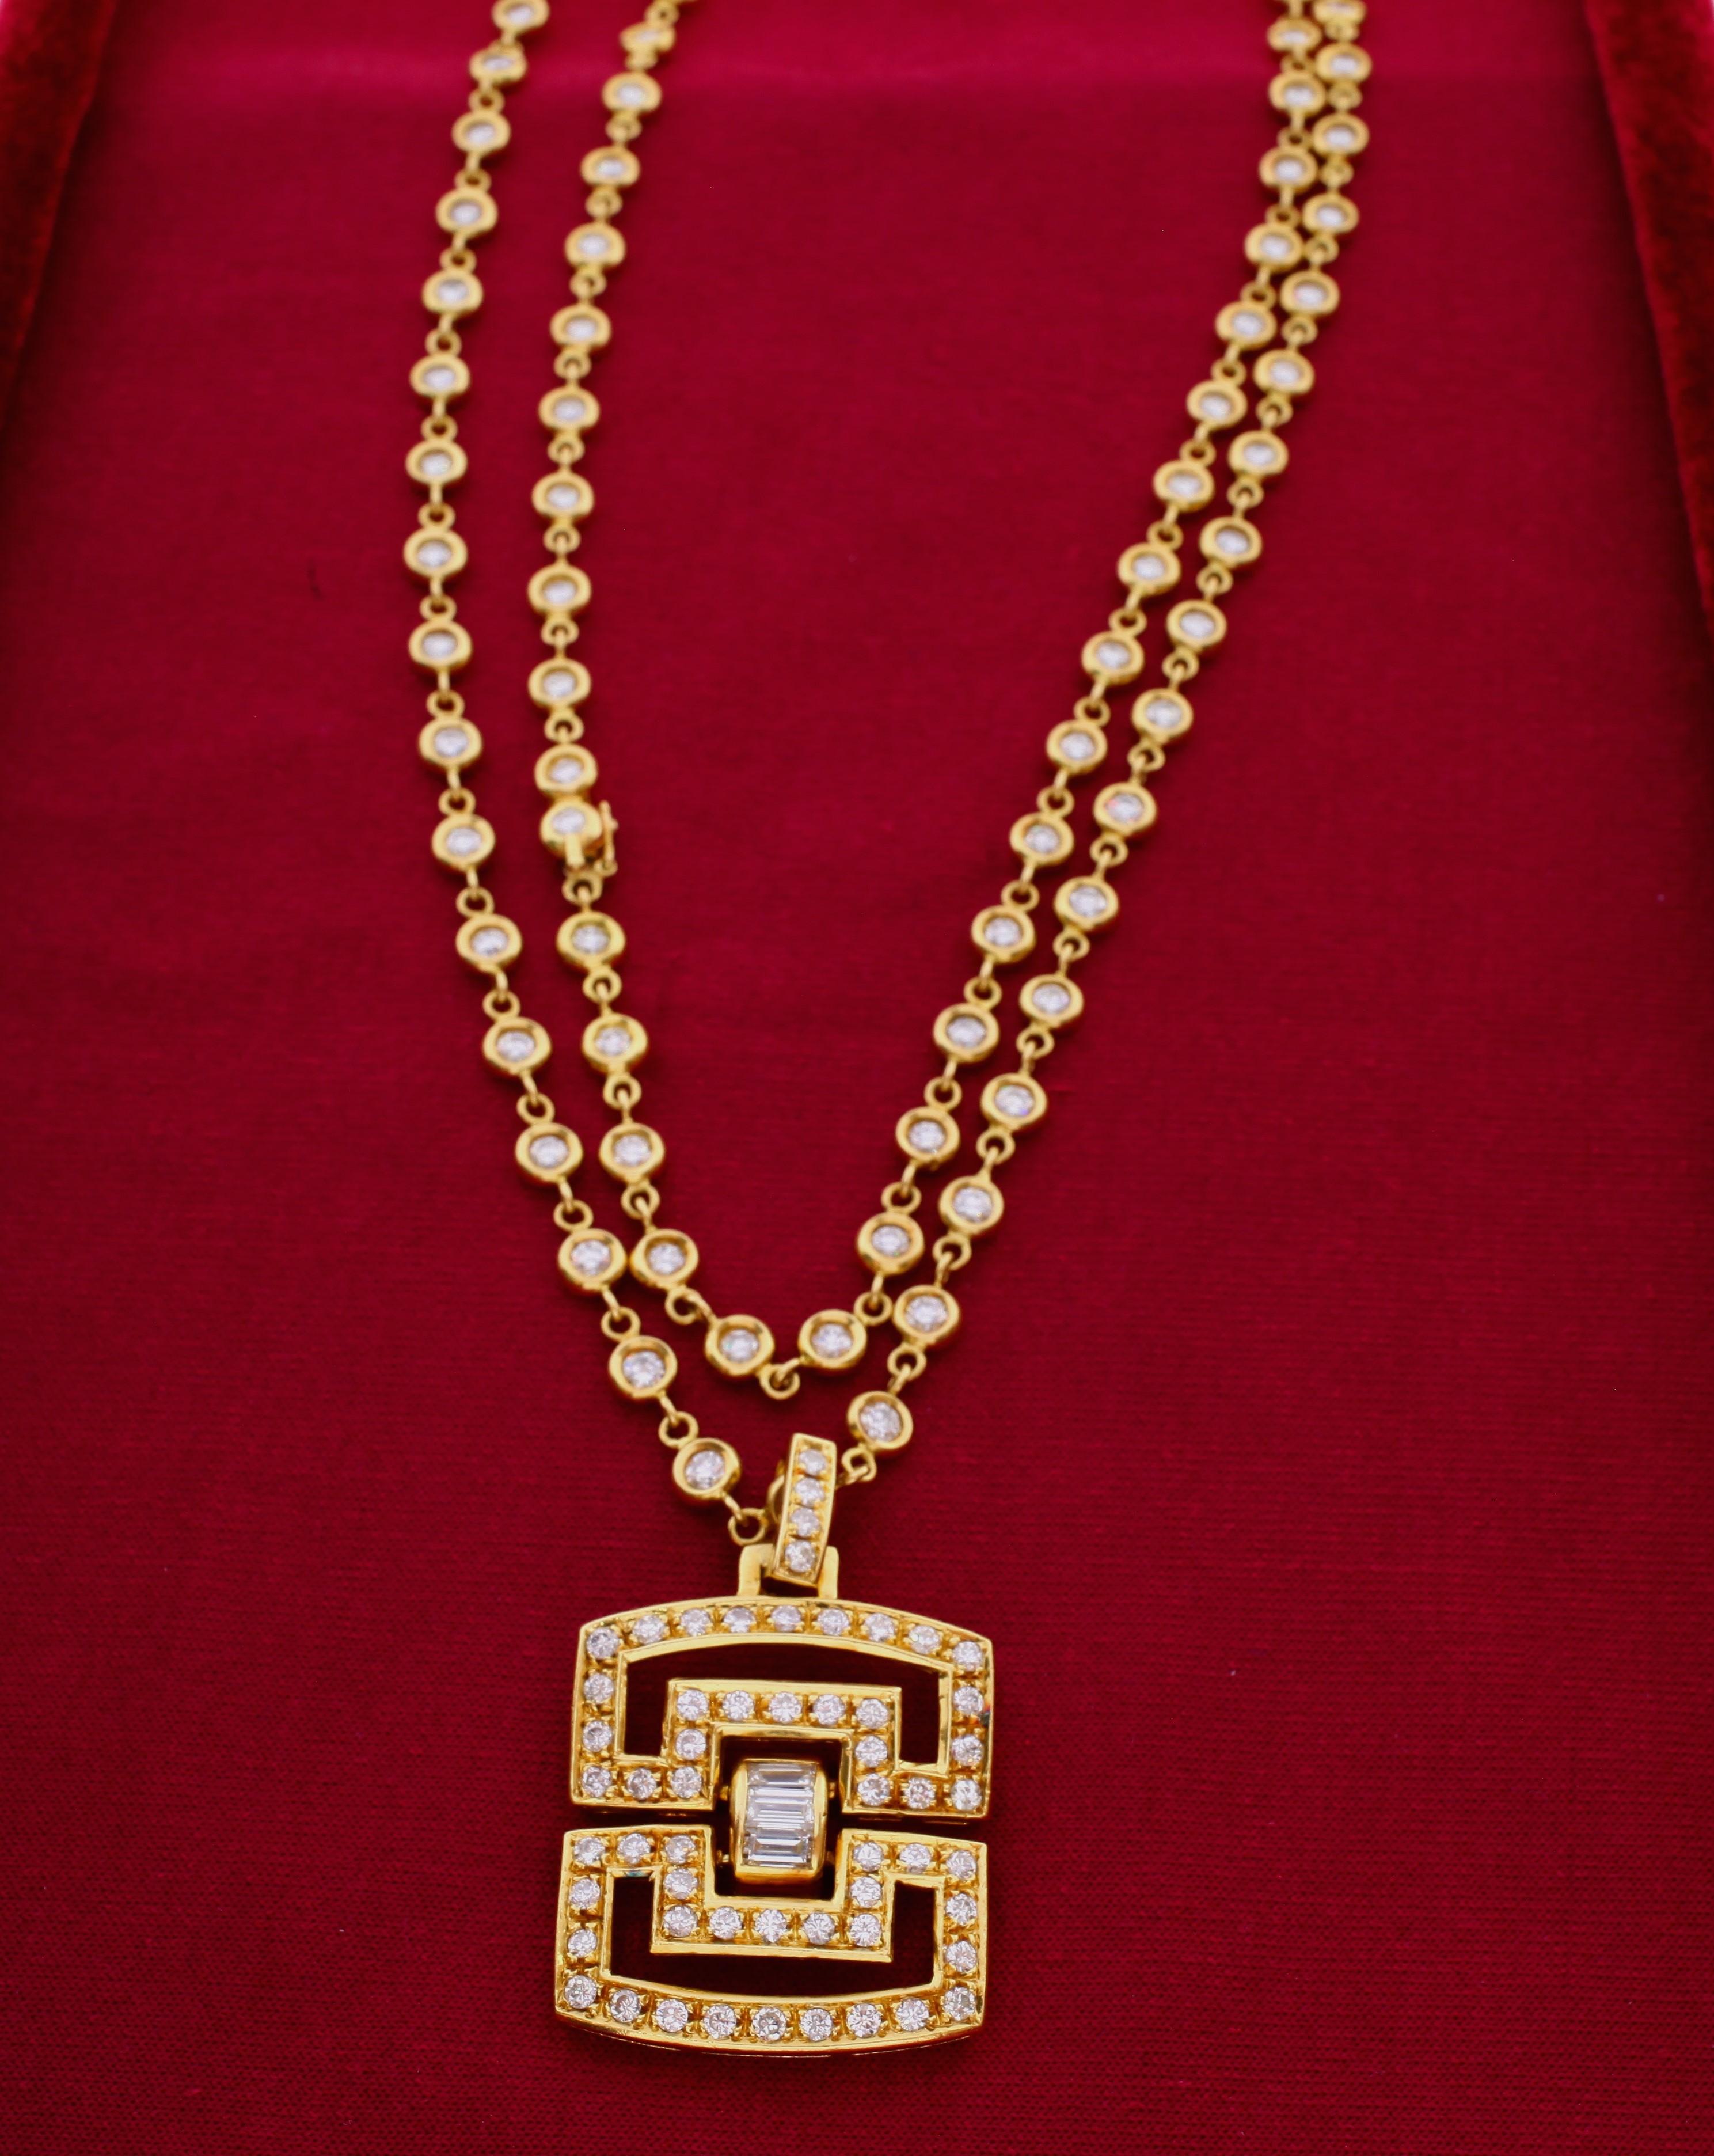 This diamond chain and pendant have each been stamped 750 for 18 karat yellow gold.
Diamonds estimated to weigh a total of approximately 9.00 - 11.00 carats, averaging H-I color, SI-I clarity, as gauged and graded in the mount.
Total gross weight 59